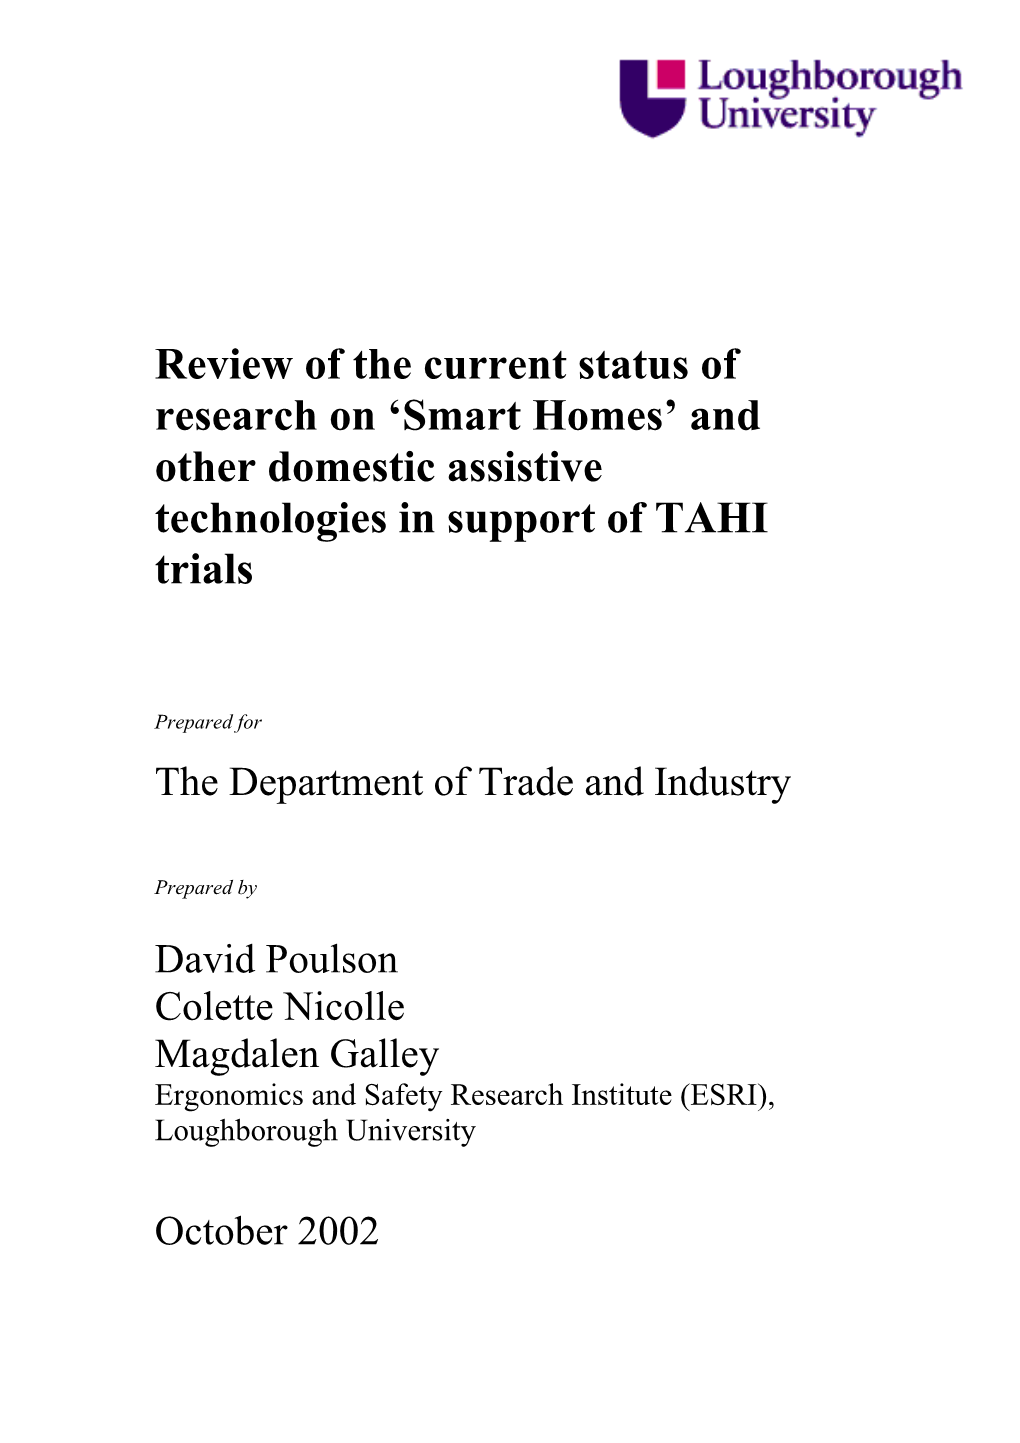 Review of the Current Status of Research on 'Smart Homes' and Other Domestic Assistive Technologies in Support of TAHI Trial